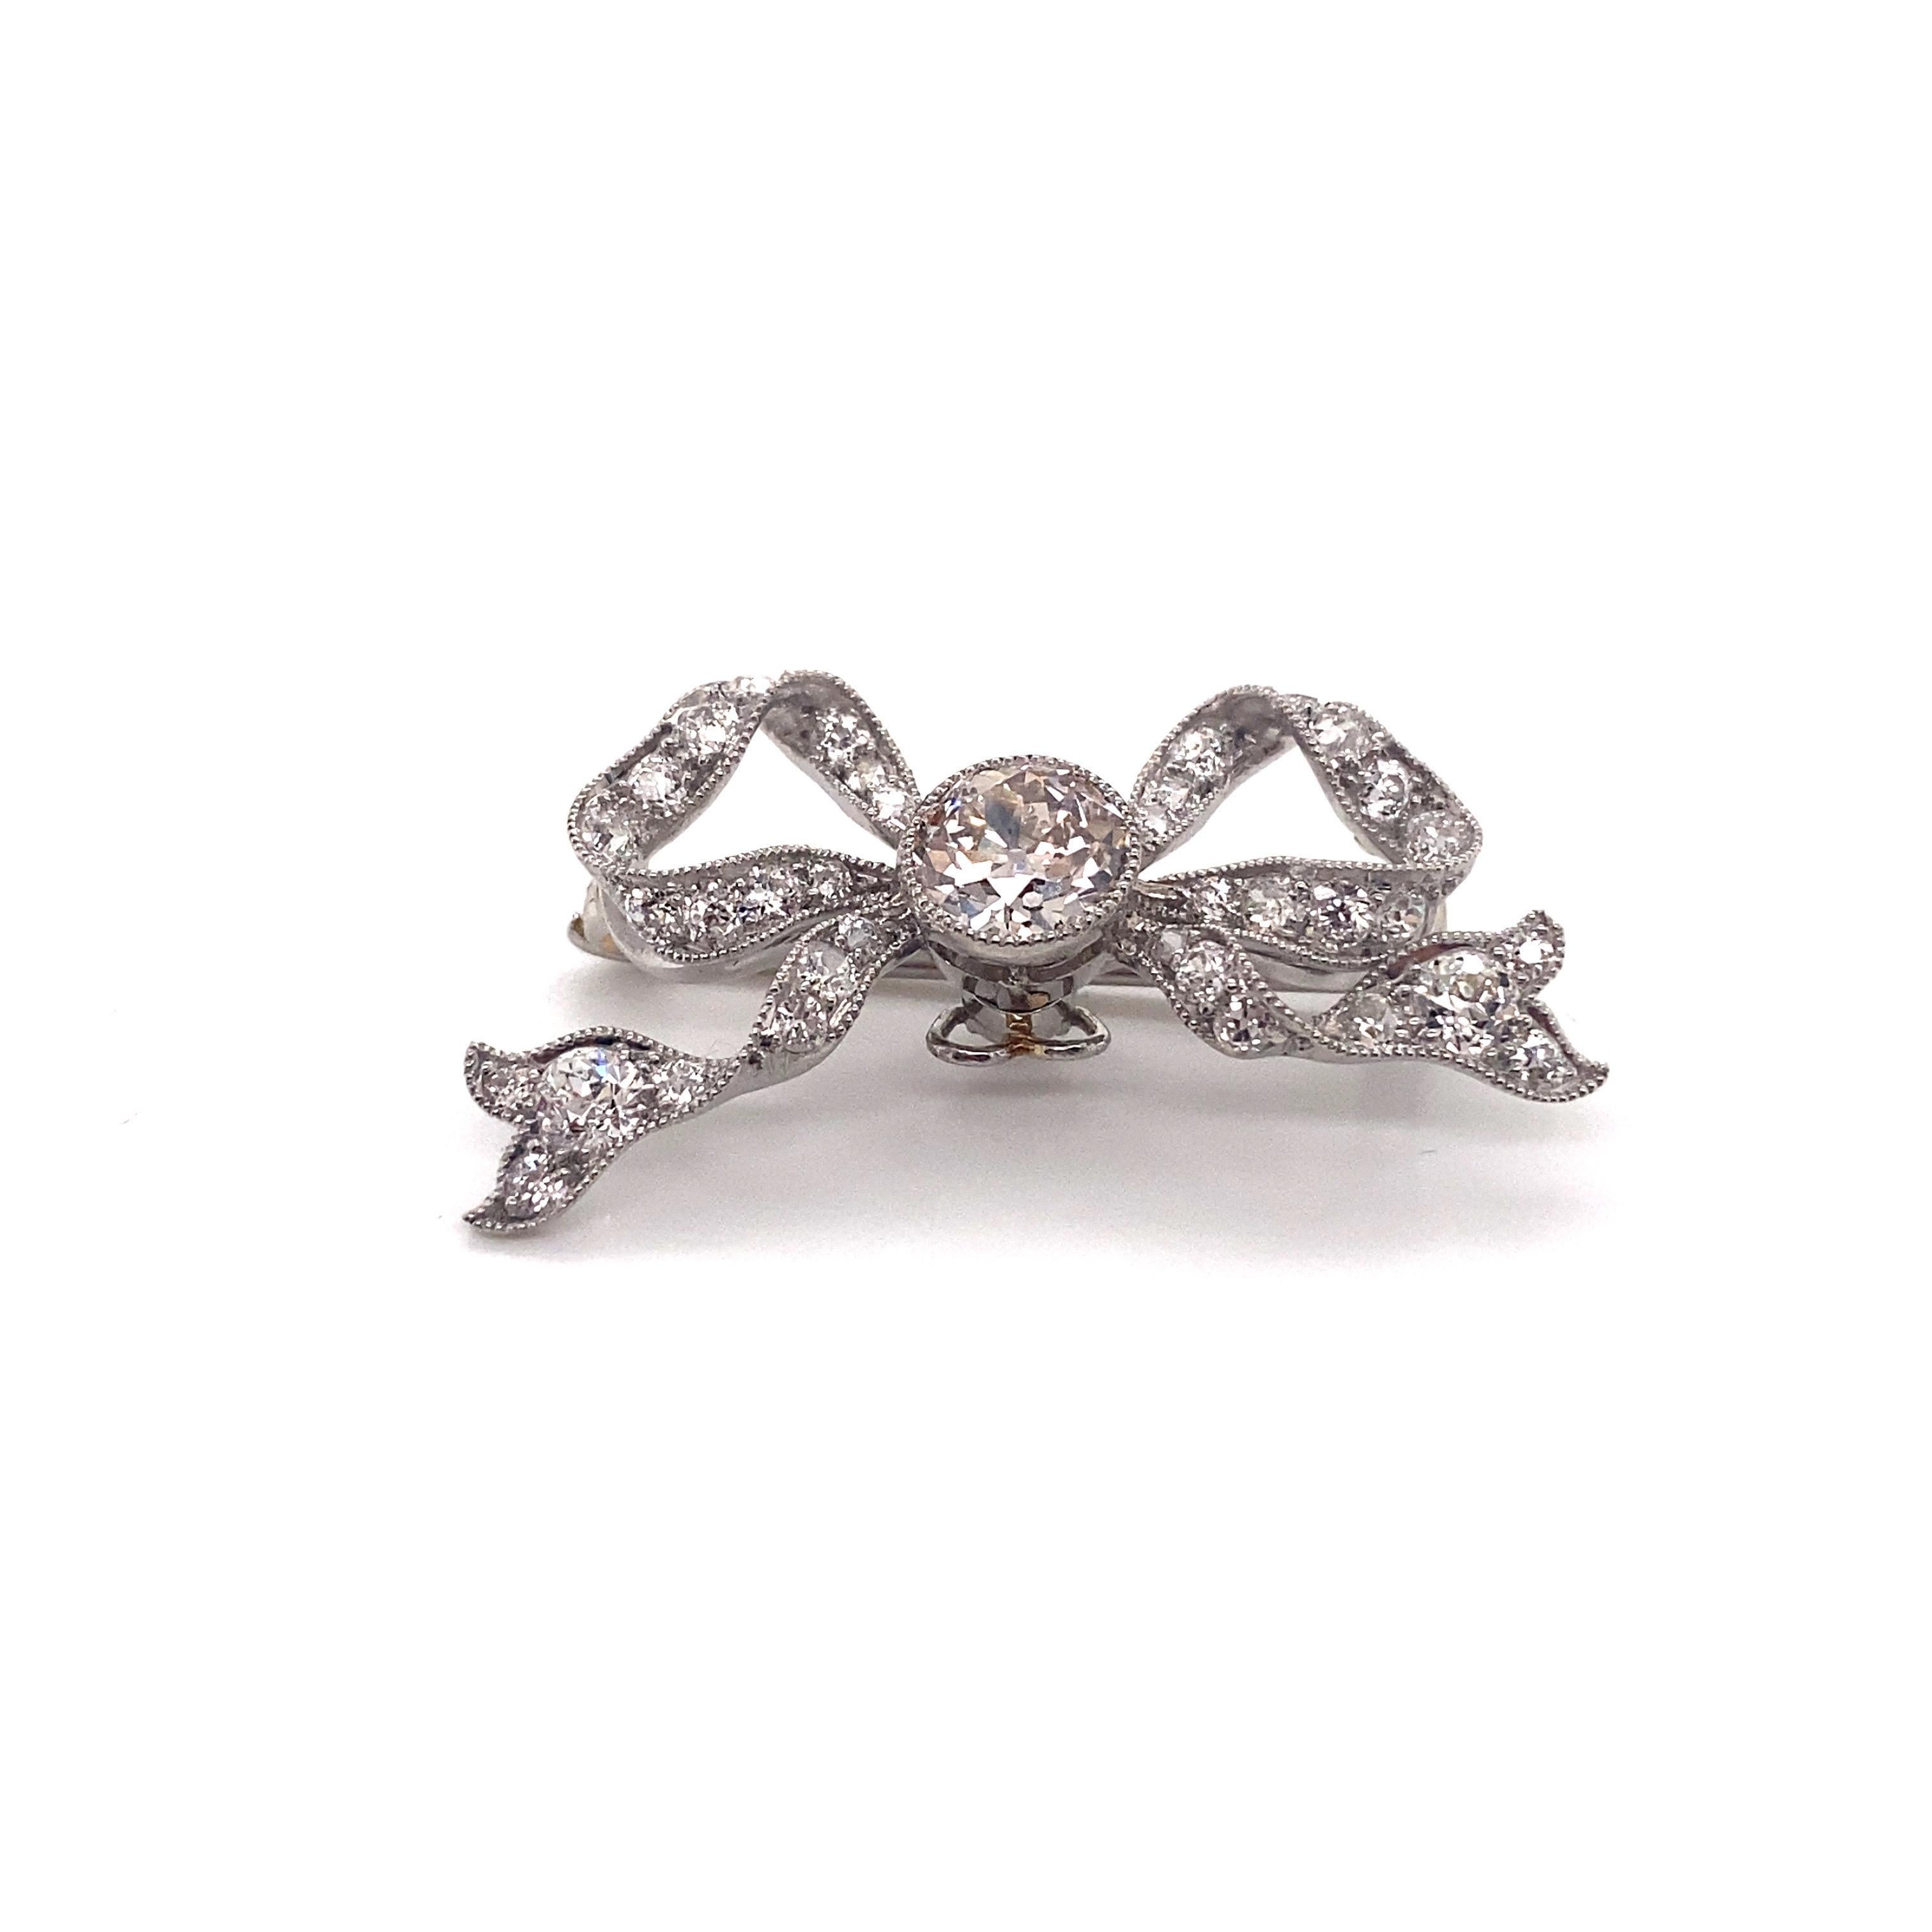 This exquisite vintage pin from the 1930s is a true testament to the exquisite craftsmanship of its era. Rendered in lustrous platinum, it showcases the timeless elegance of the Art Deco period with its distinctive bow design.

The centerpiece of